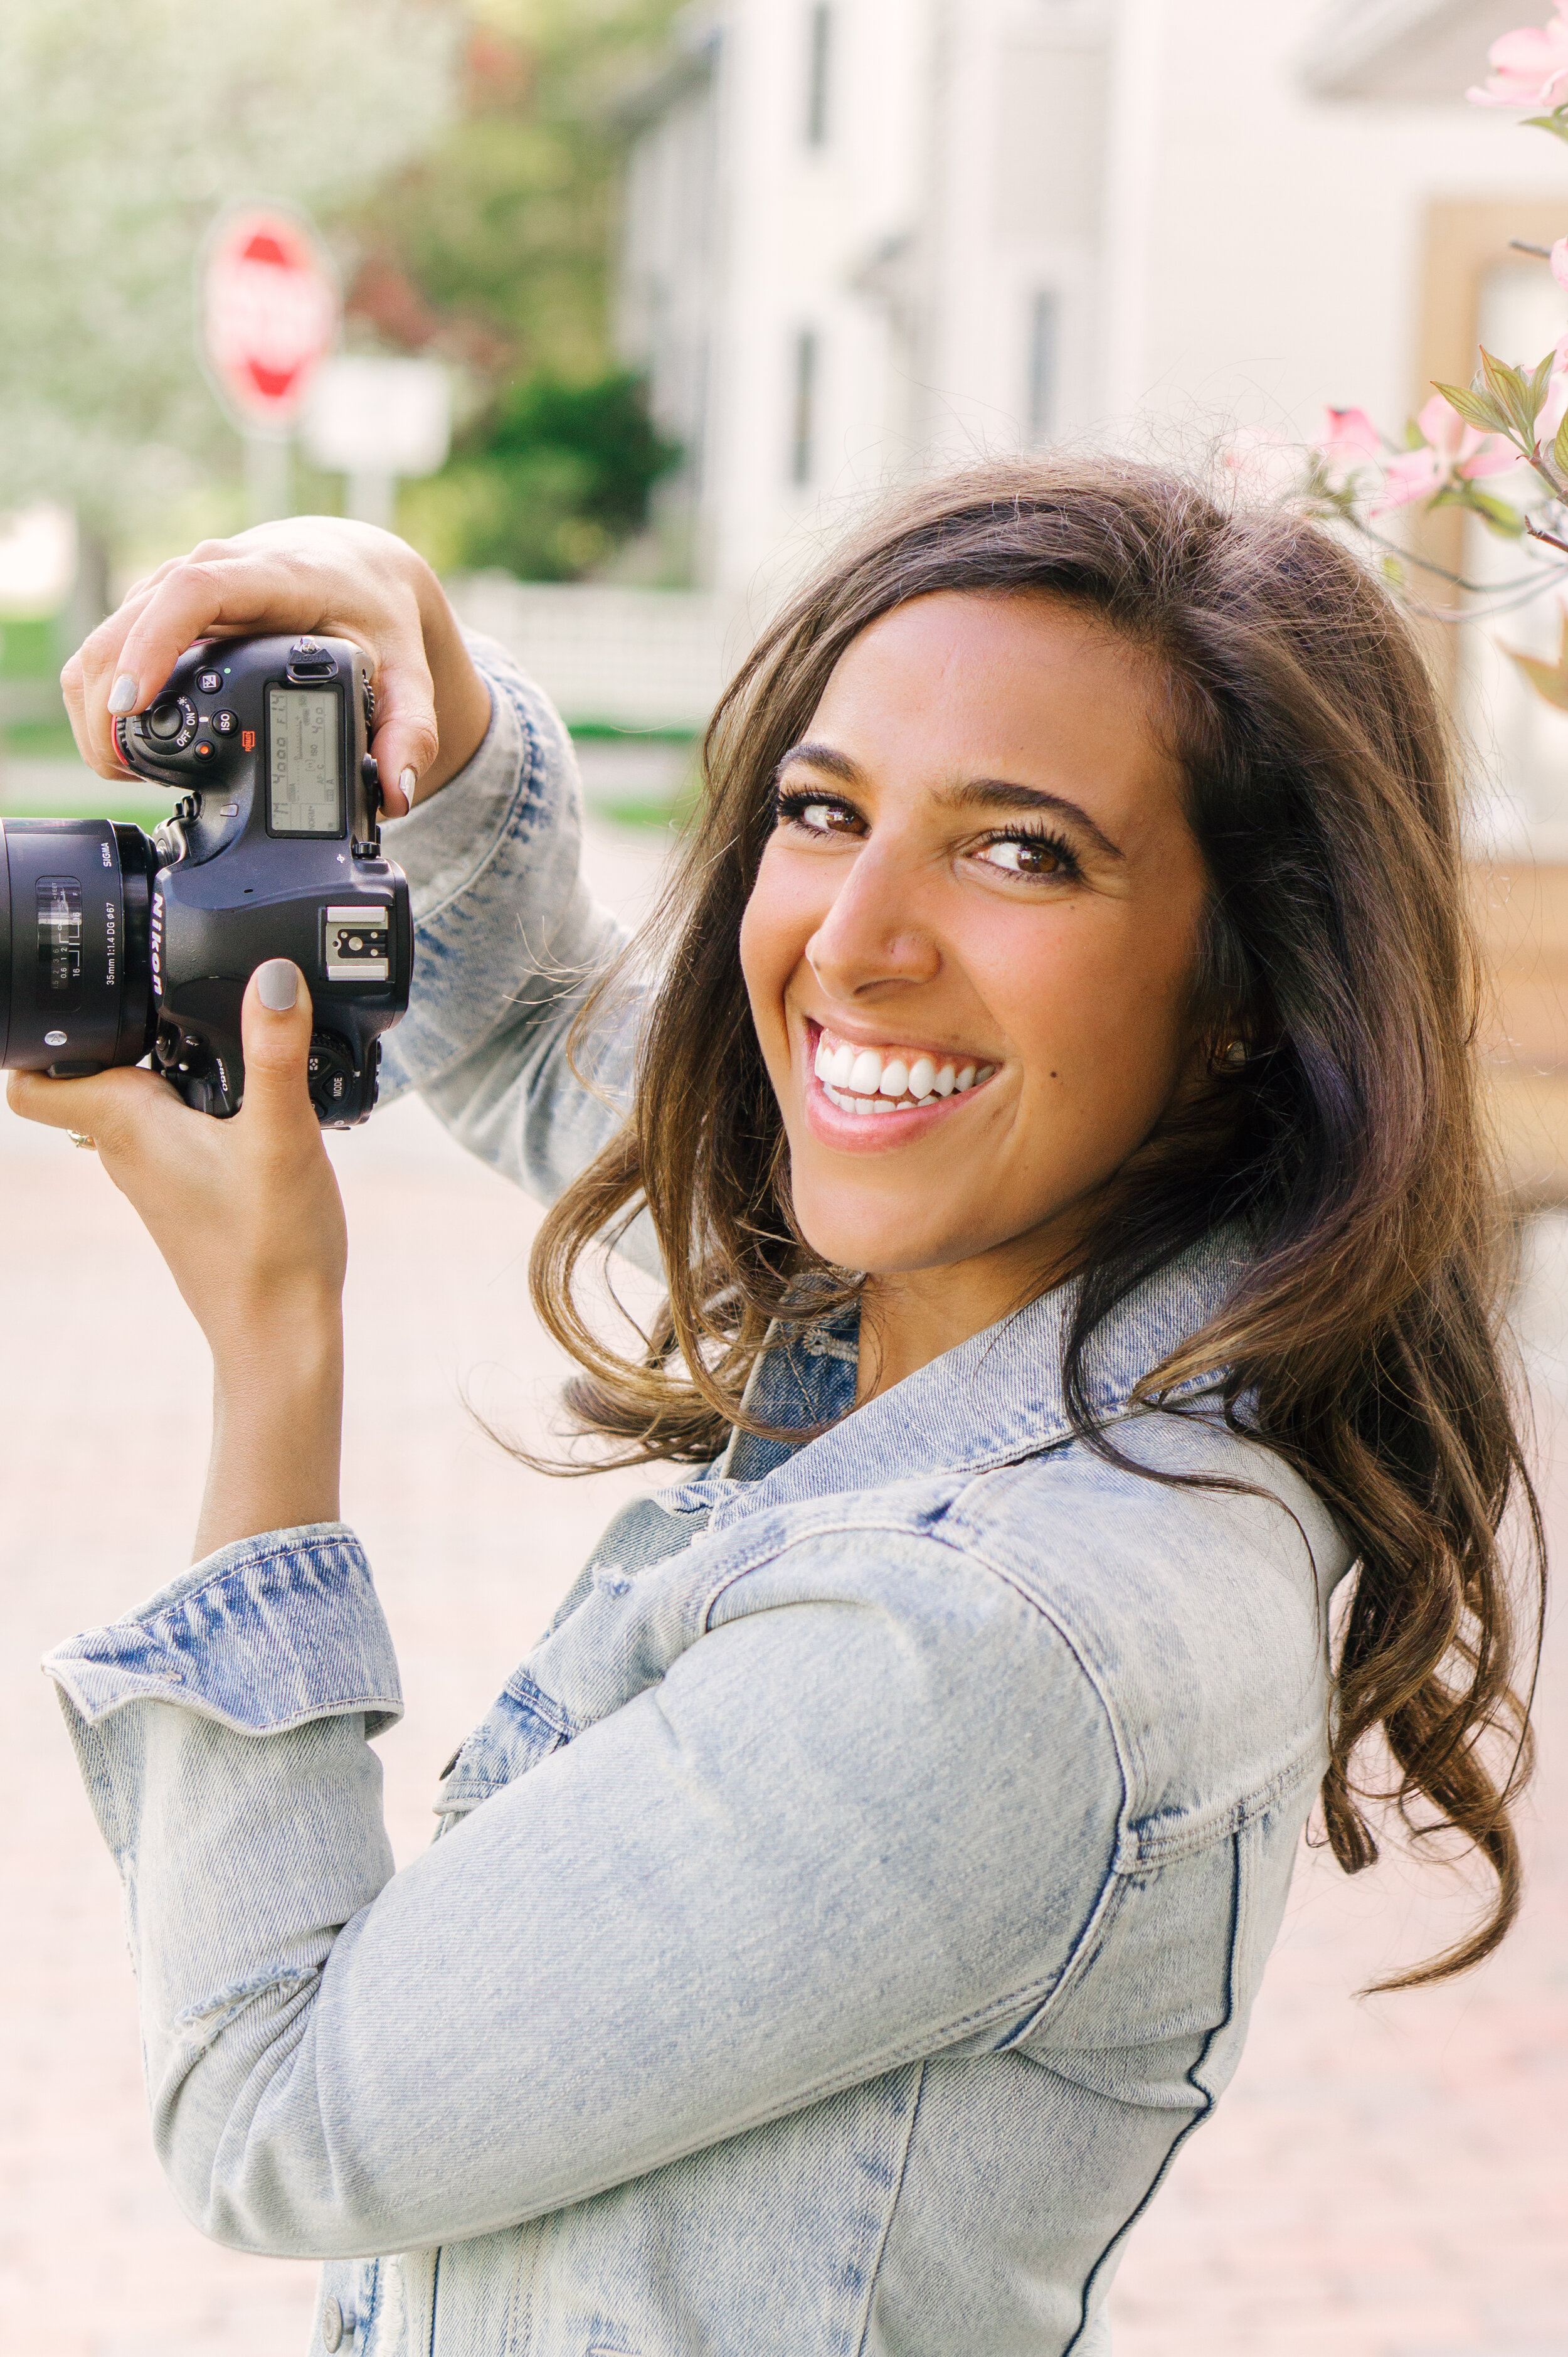 How to Become a Full-Time Brand and Lifestyle Photographer